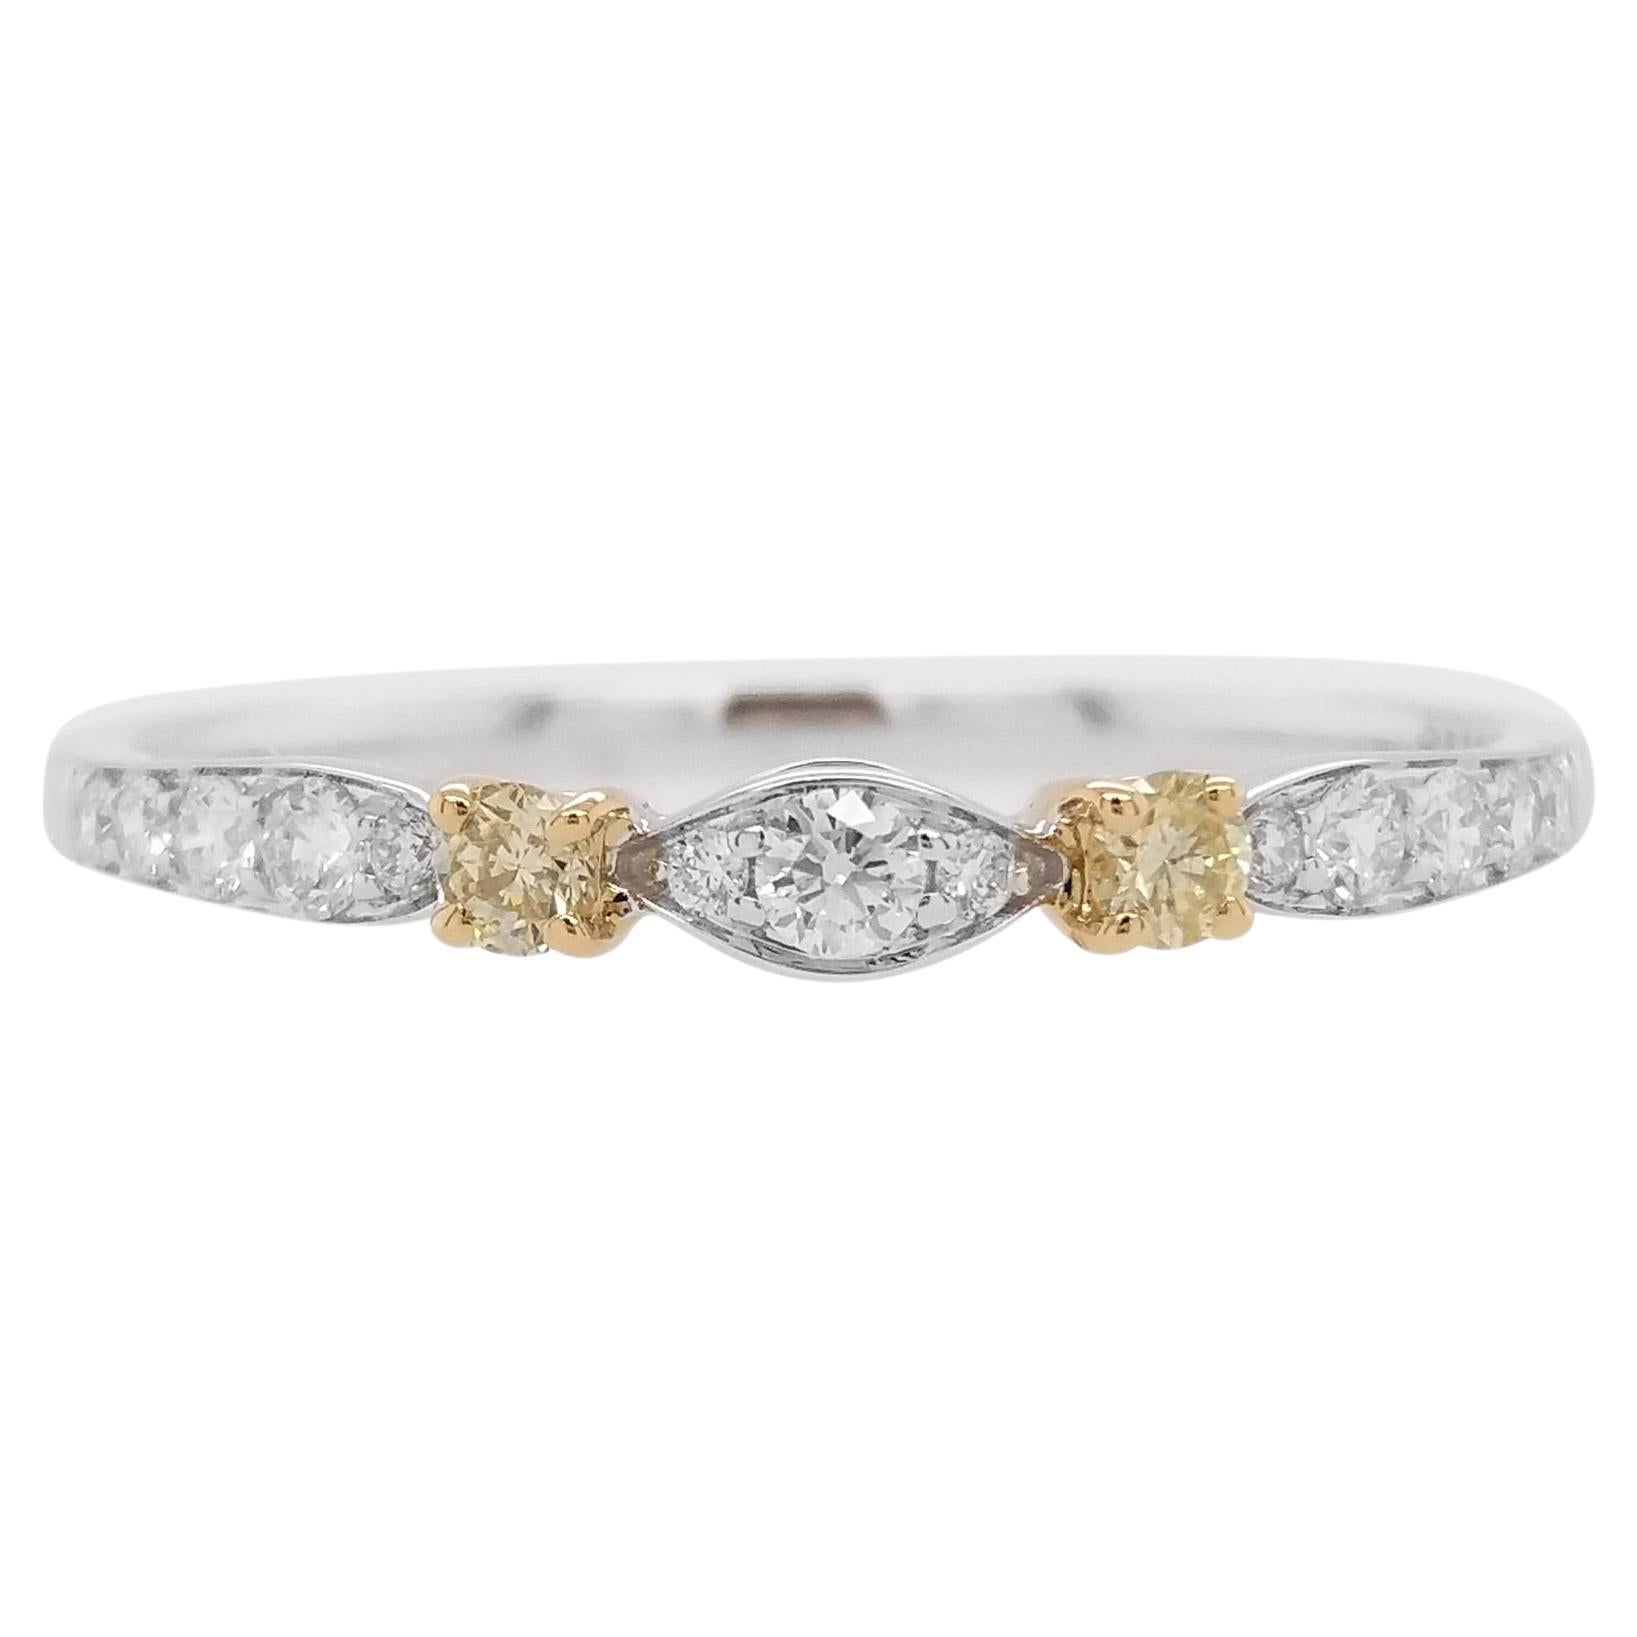 Rare Brilliant-Cut Yellow Diamond and White diamond Band Ring made in 18K Gold For Sale